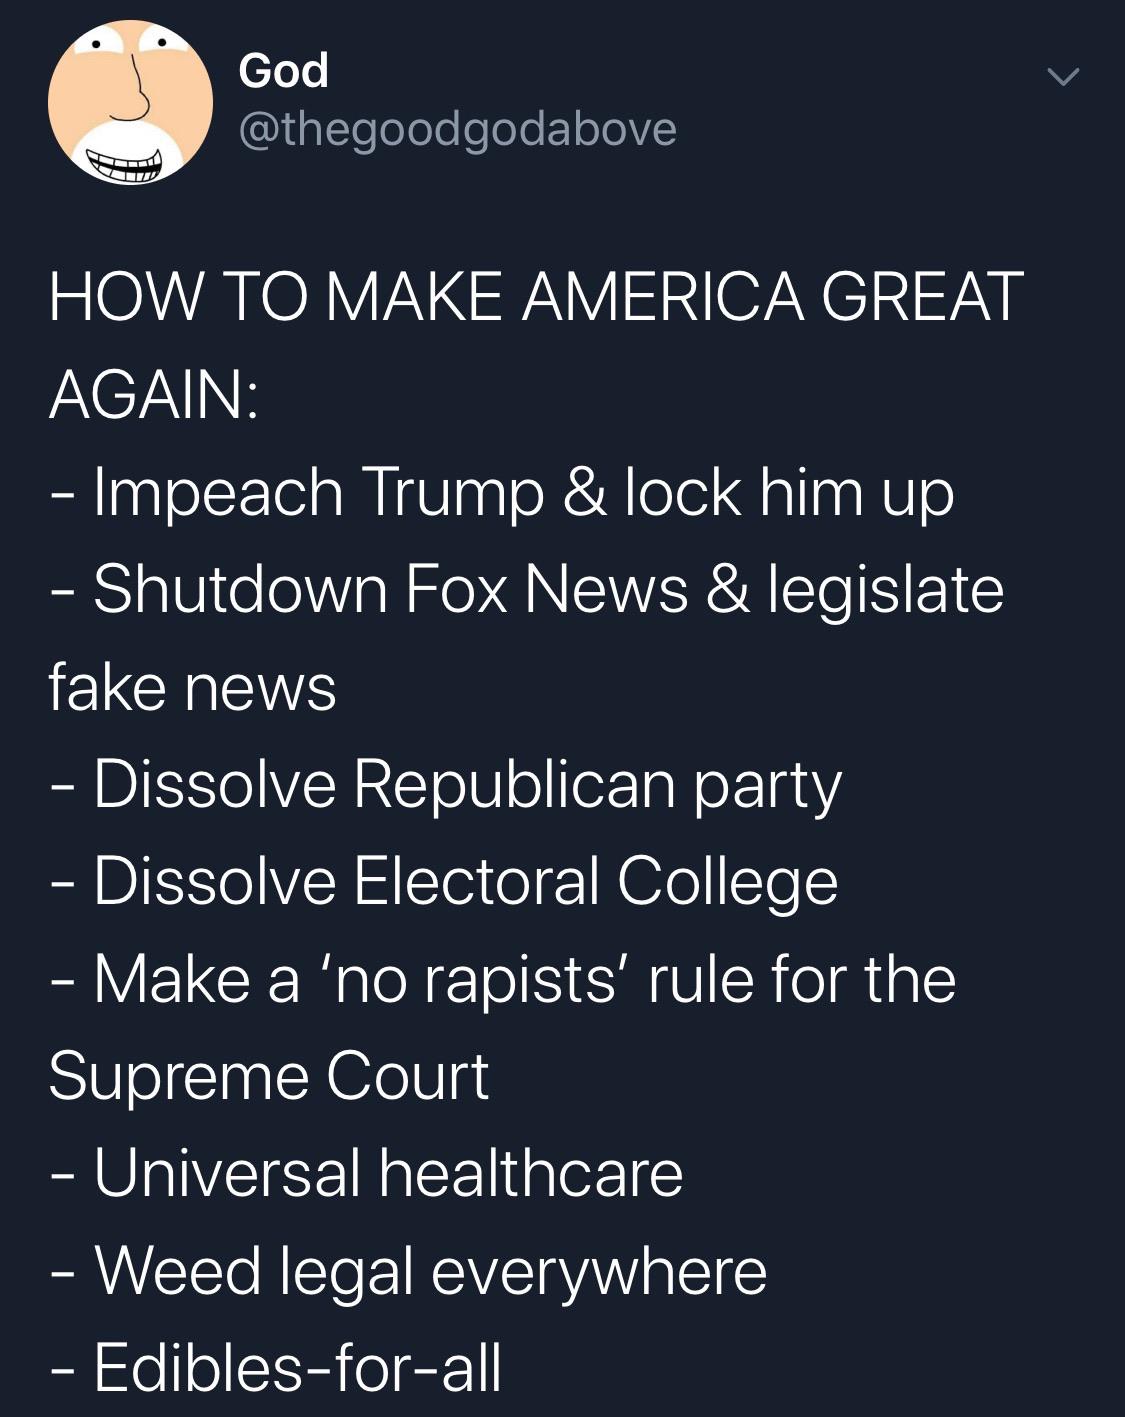 political political-memes political text: @thegoodgodabove HOW TO MAKE AMERICA GREAT - Impeach Trump & lock him up - Shutdown Fox News & legislate fake news - Dissolve Republican party - Dissolve Electoral College - Make a Ino rapists' rule for the Supreme Court - Universal healthcare — Weed legal everywhere - Edibles-for-all 